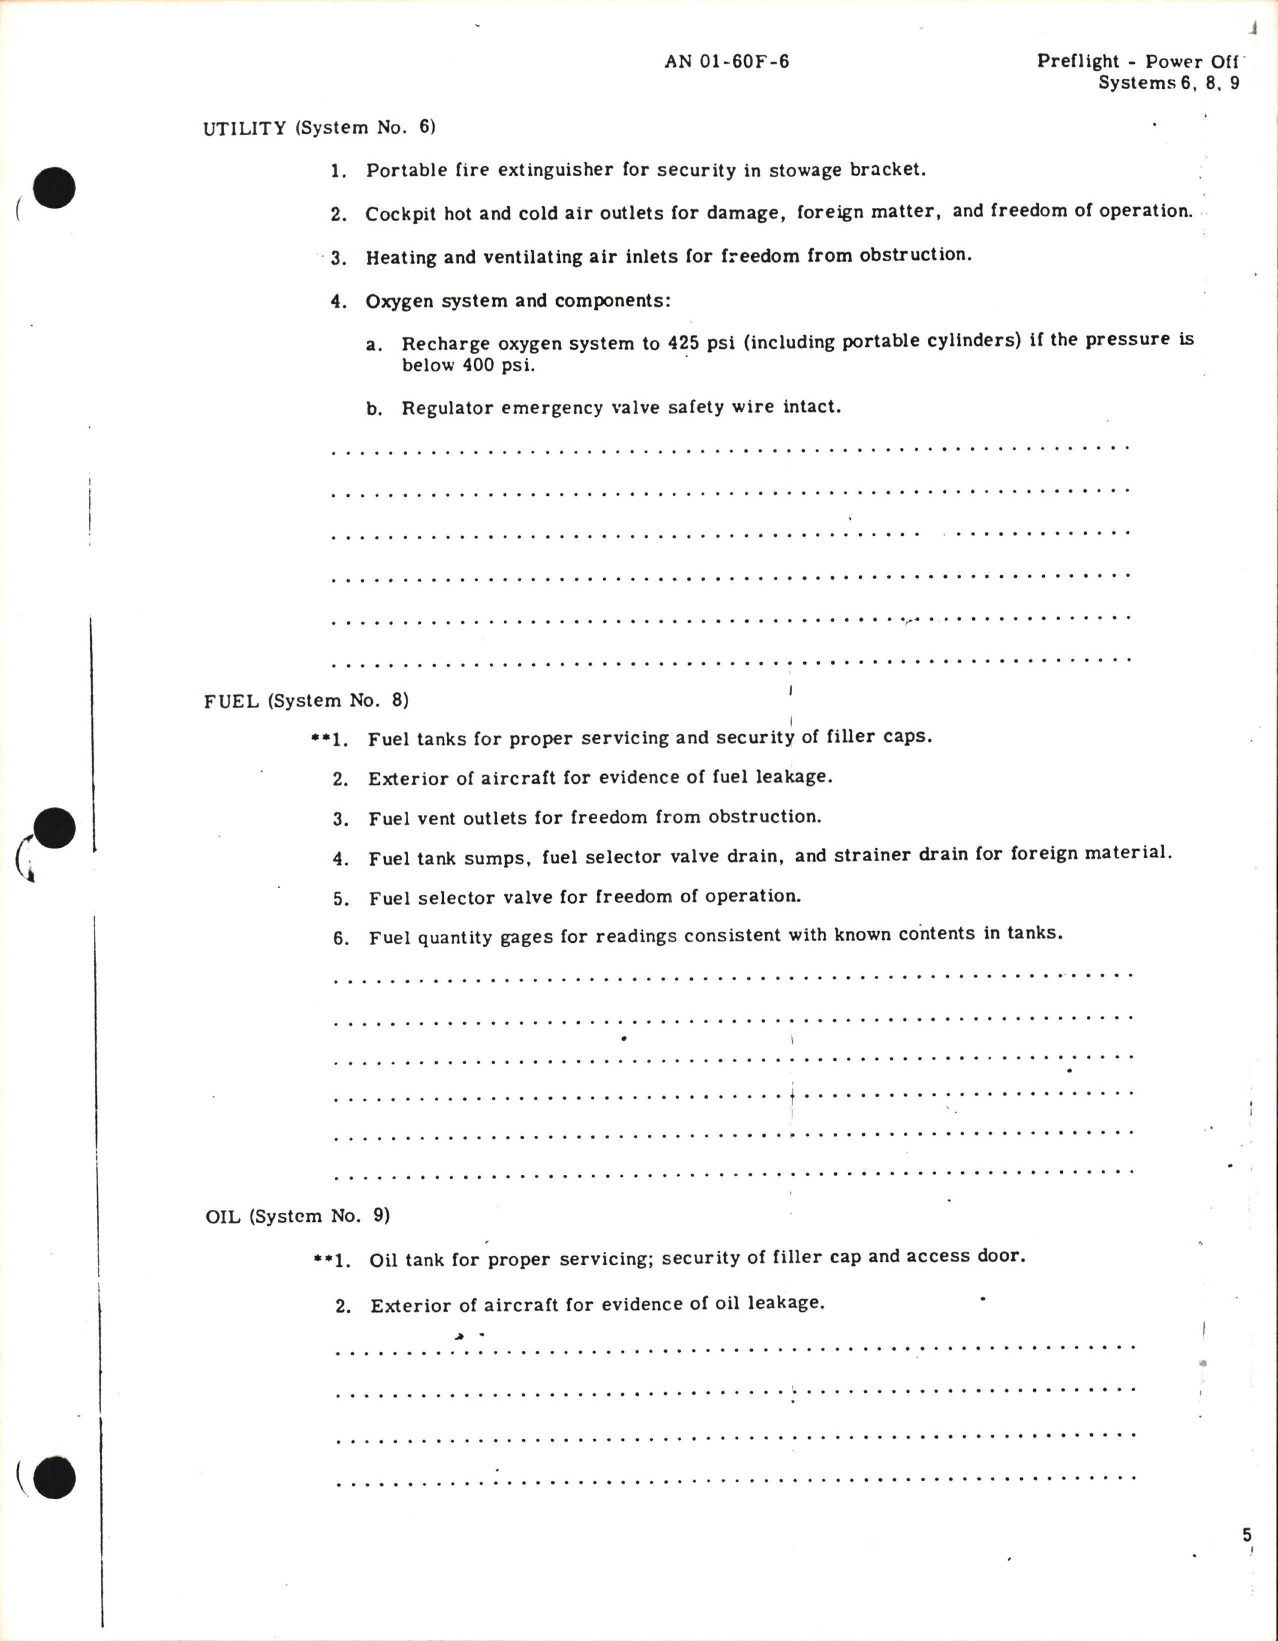 Sample page 6 from AirCorps Library document: Inspection Requirements for T-6